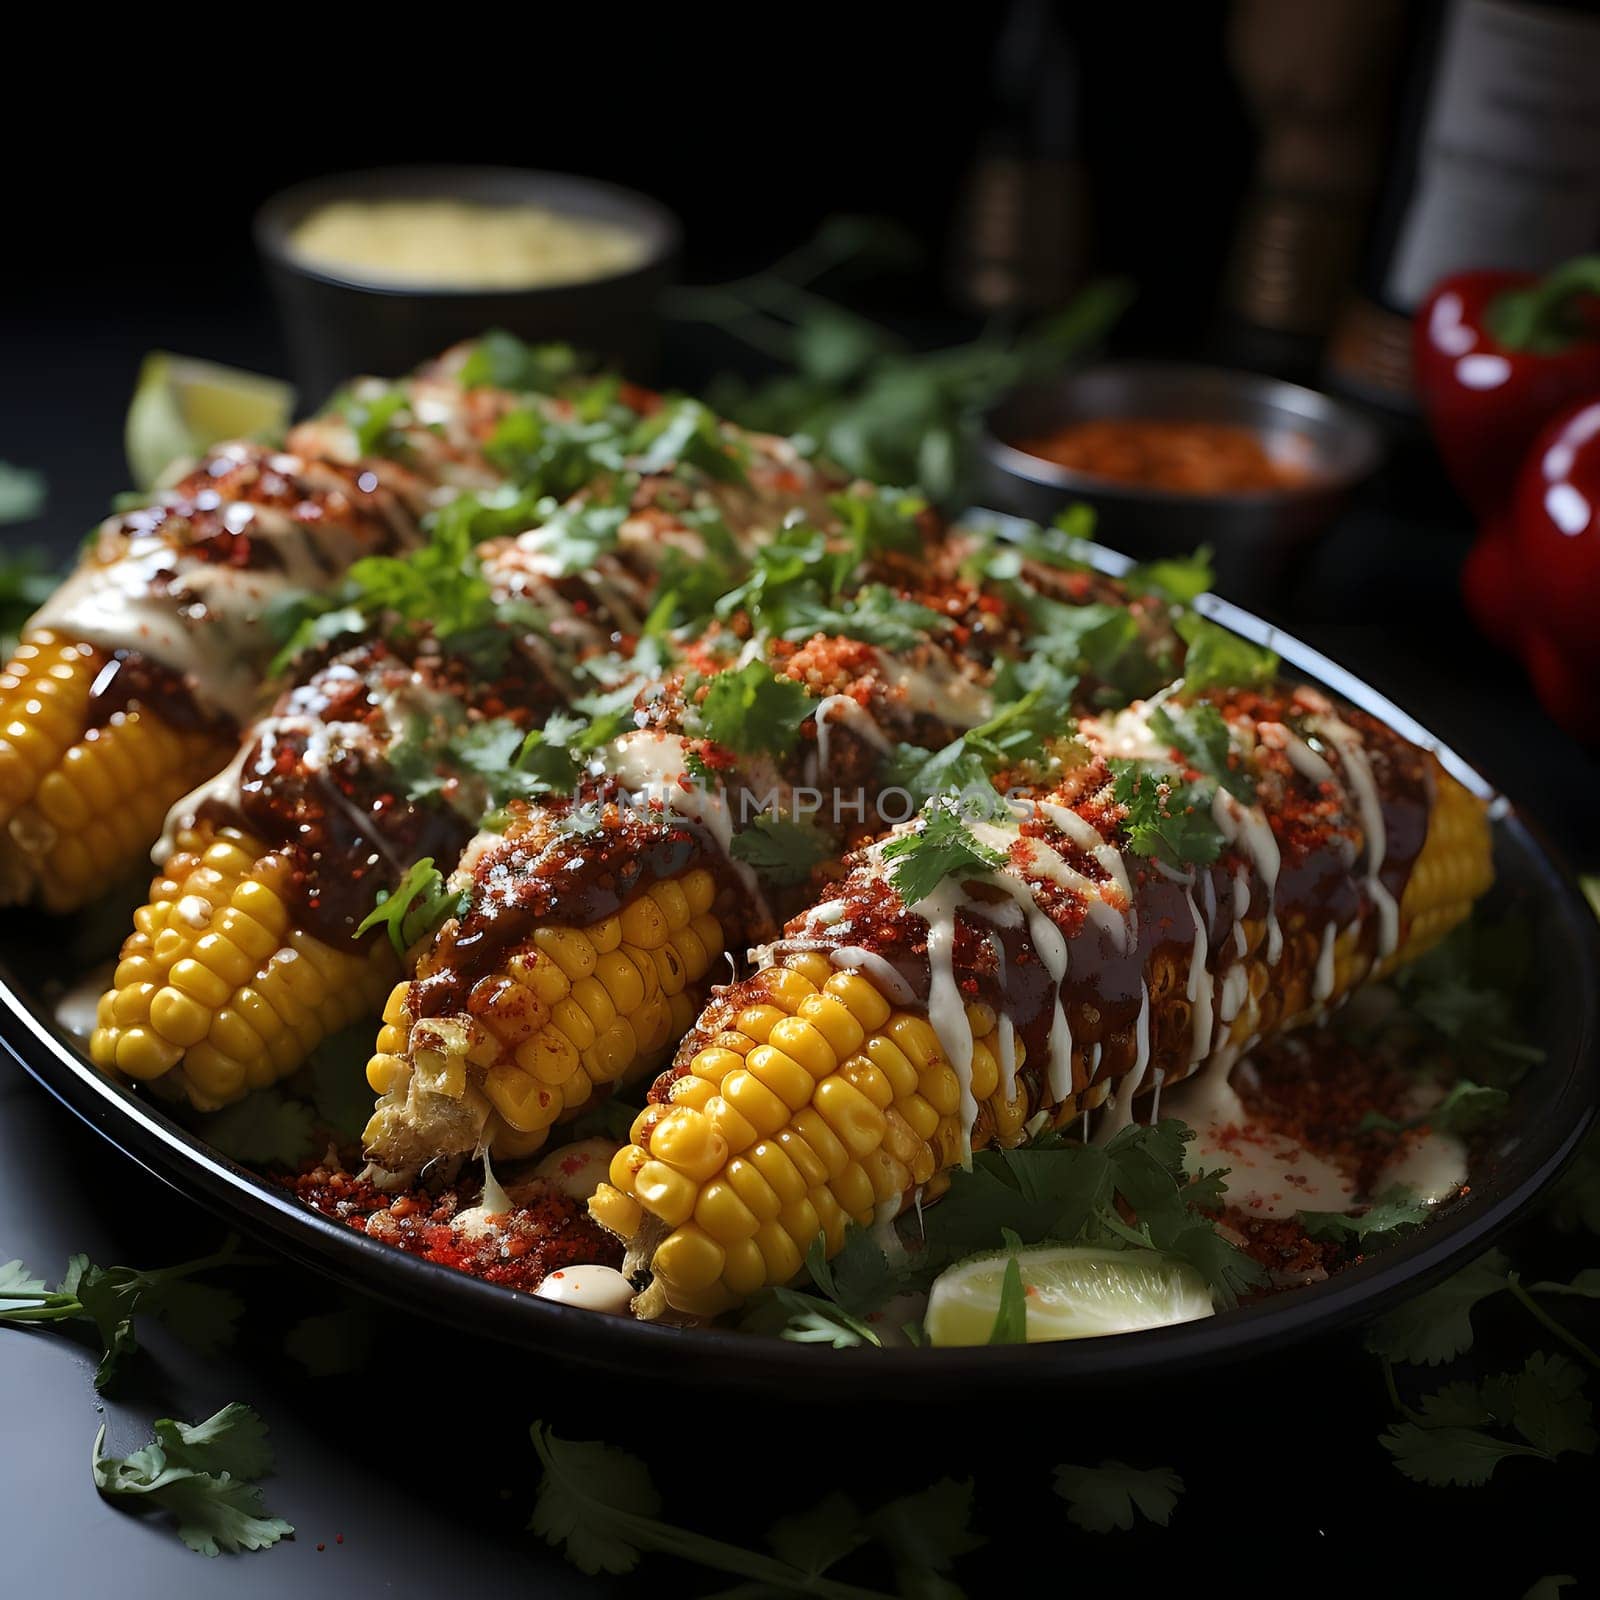 Seasoned yellow cobs, corn with sauces and green spices on a plate. Corn as a dish of thanksgiving for the harvest. An atmosphere of joy and celebration.